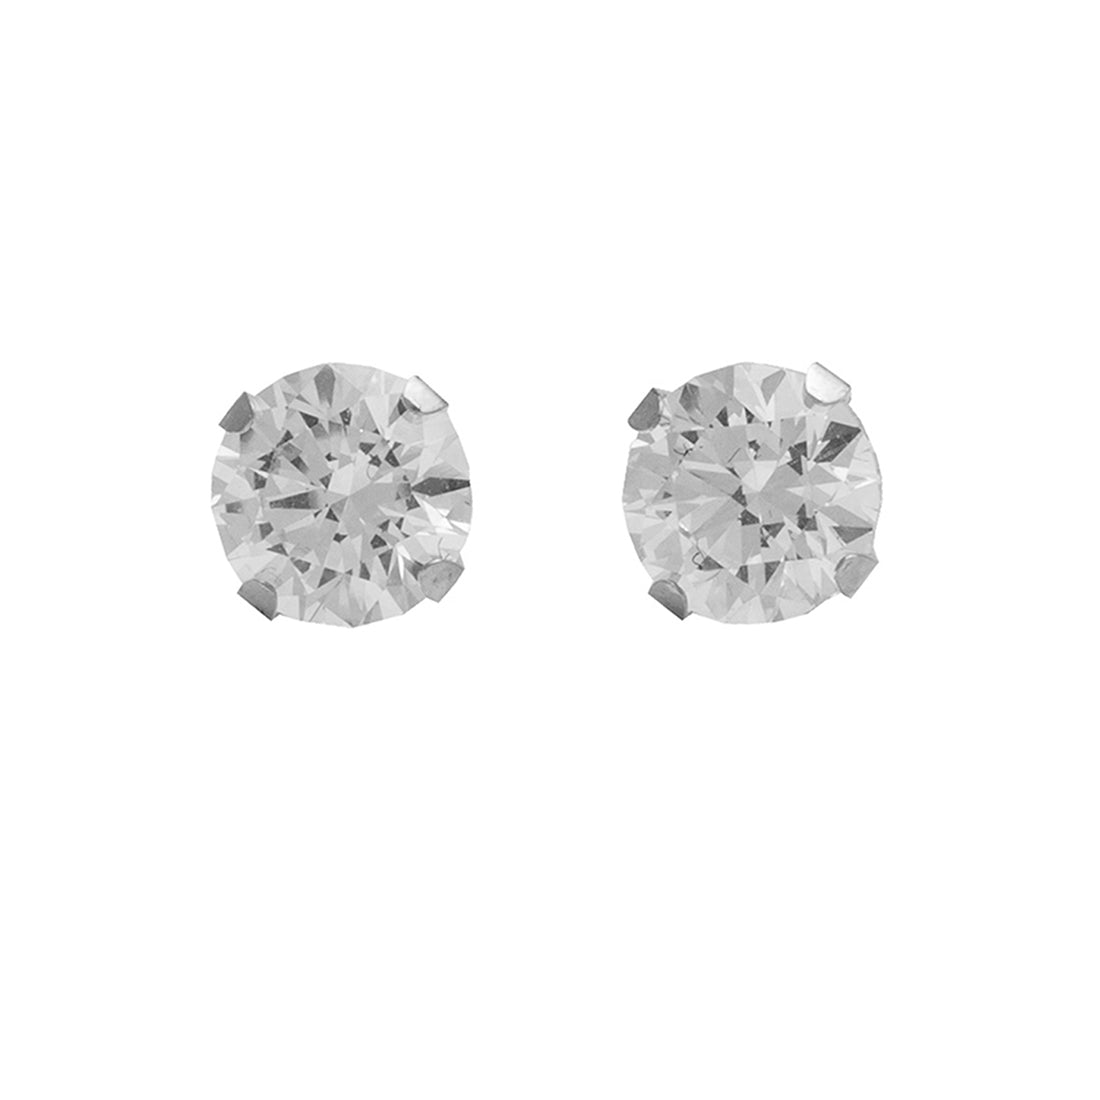 5MM Cubic Zirconia Allergy Free Stainless Steel Ear Studs | Ideal for everyday wear